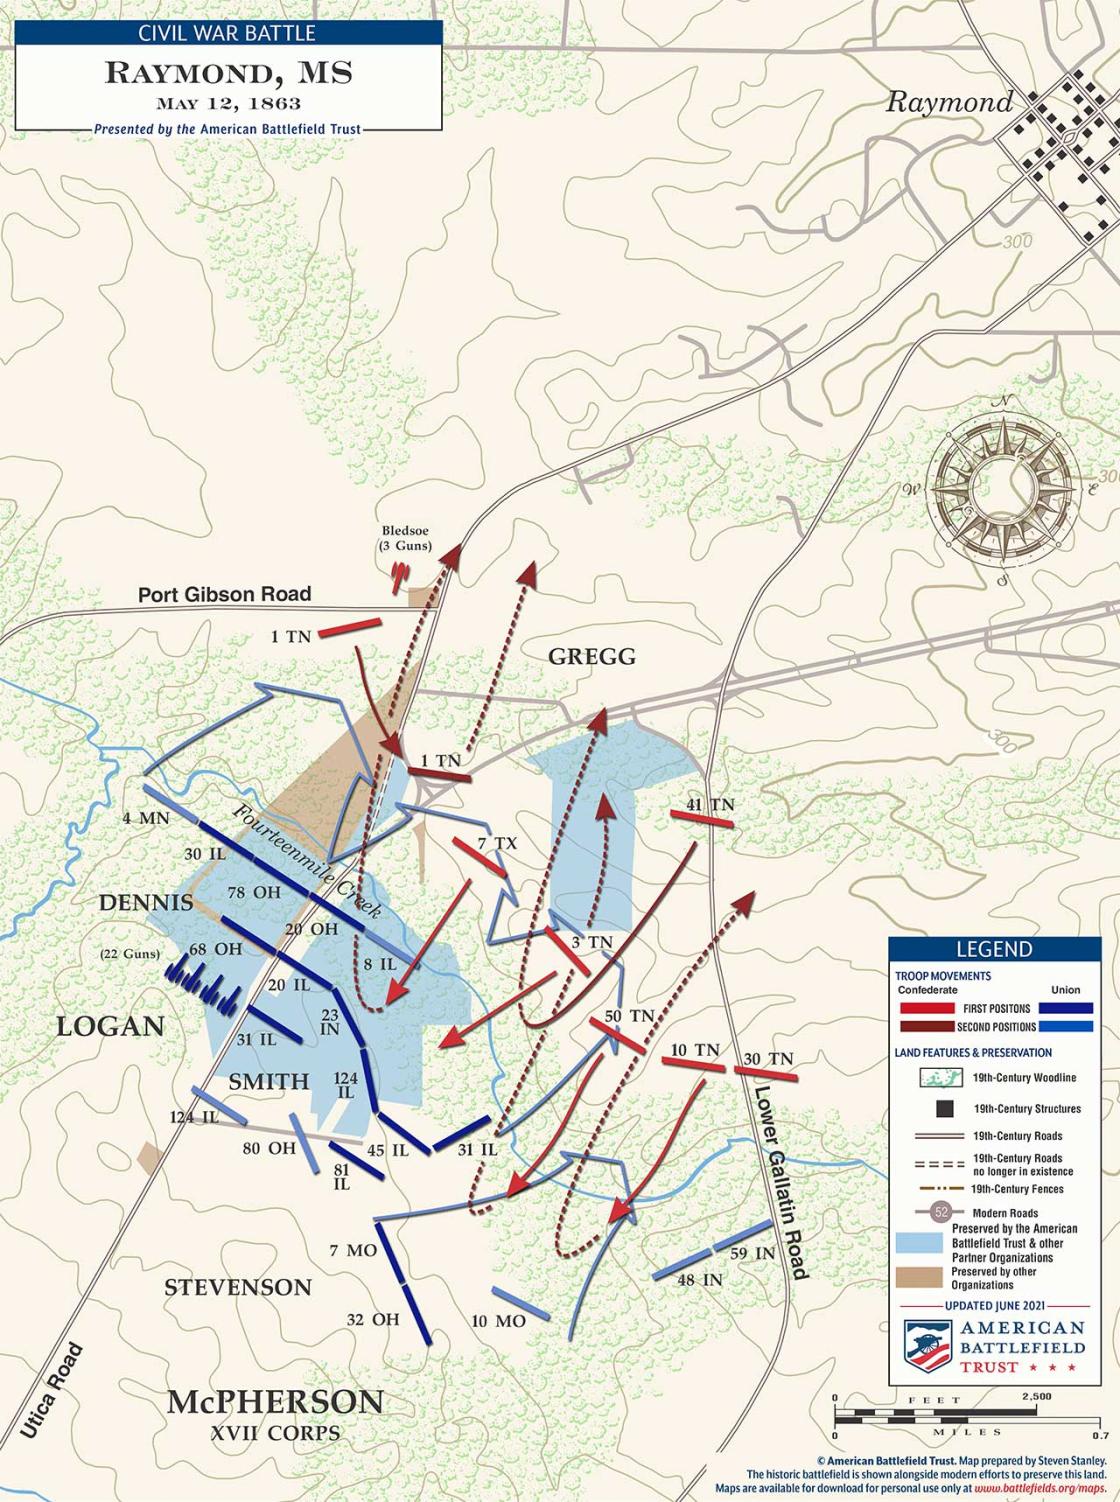 American Battlefield Trust’s map of the Battle of Raymond, Mississippi on May 12, 1863